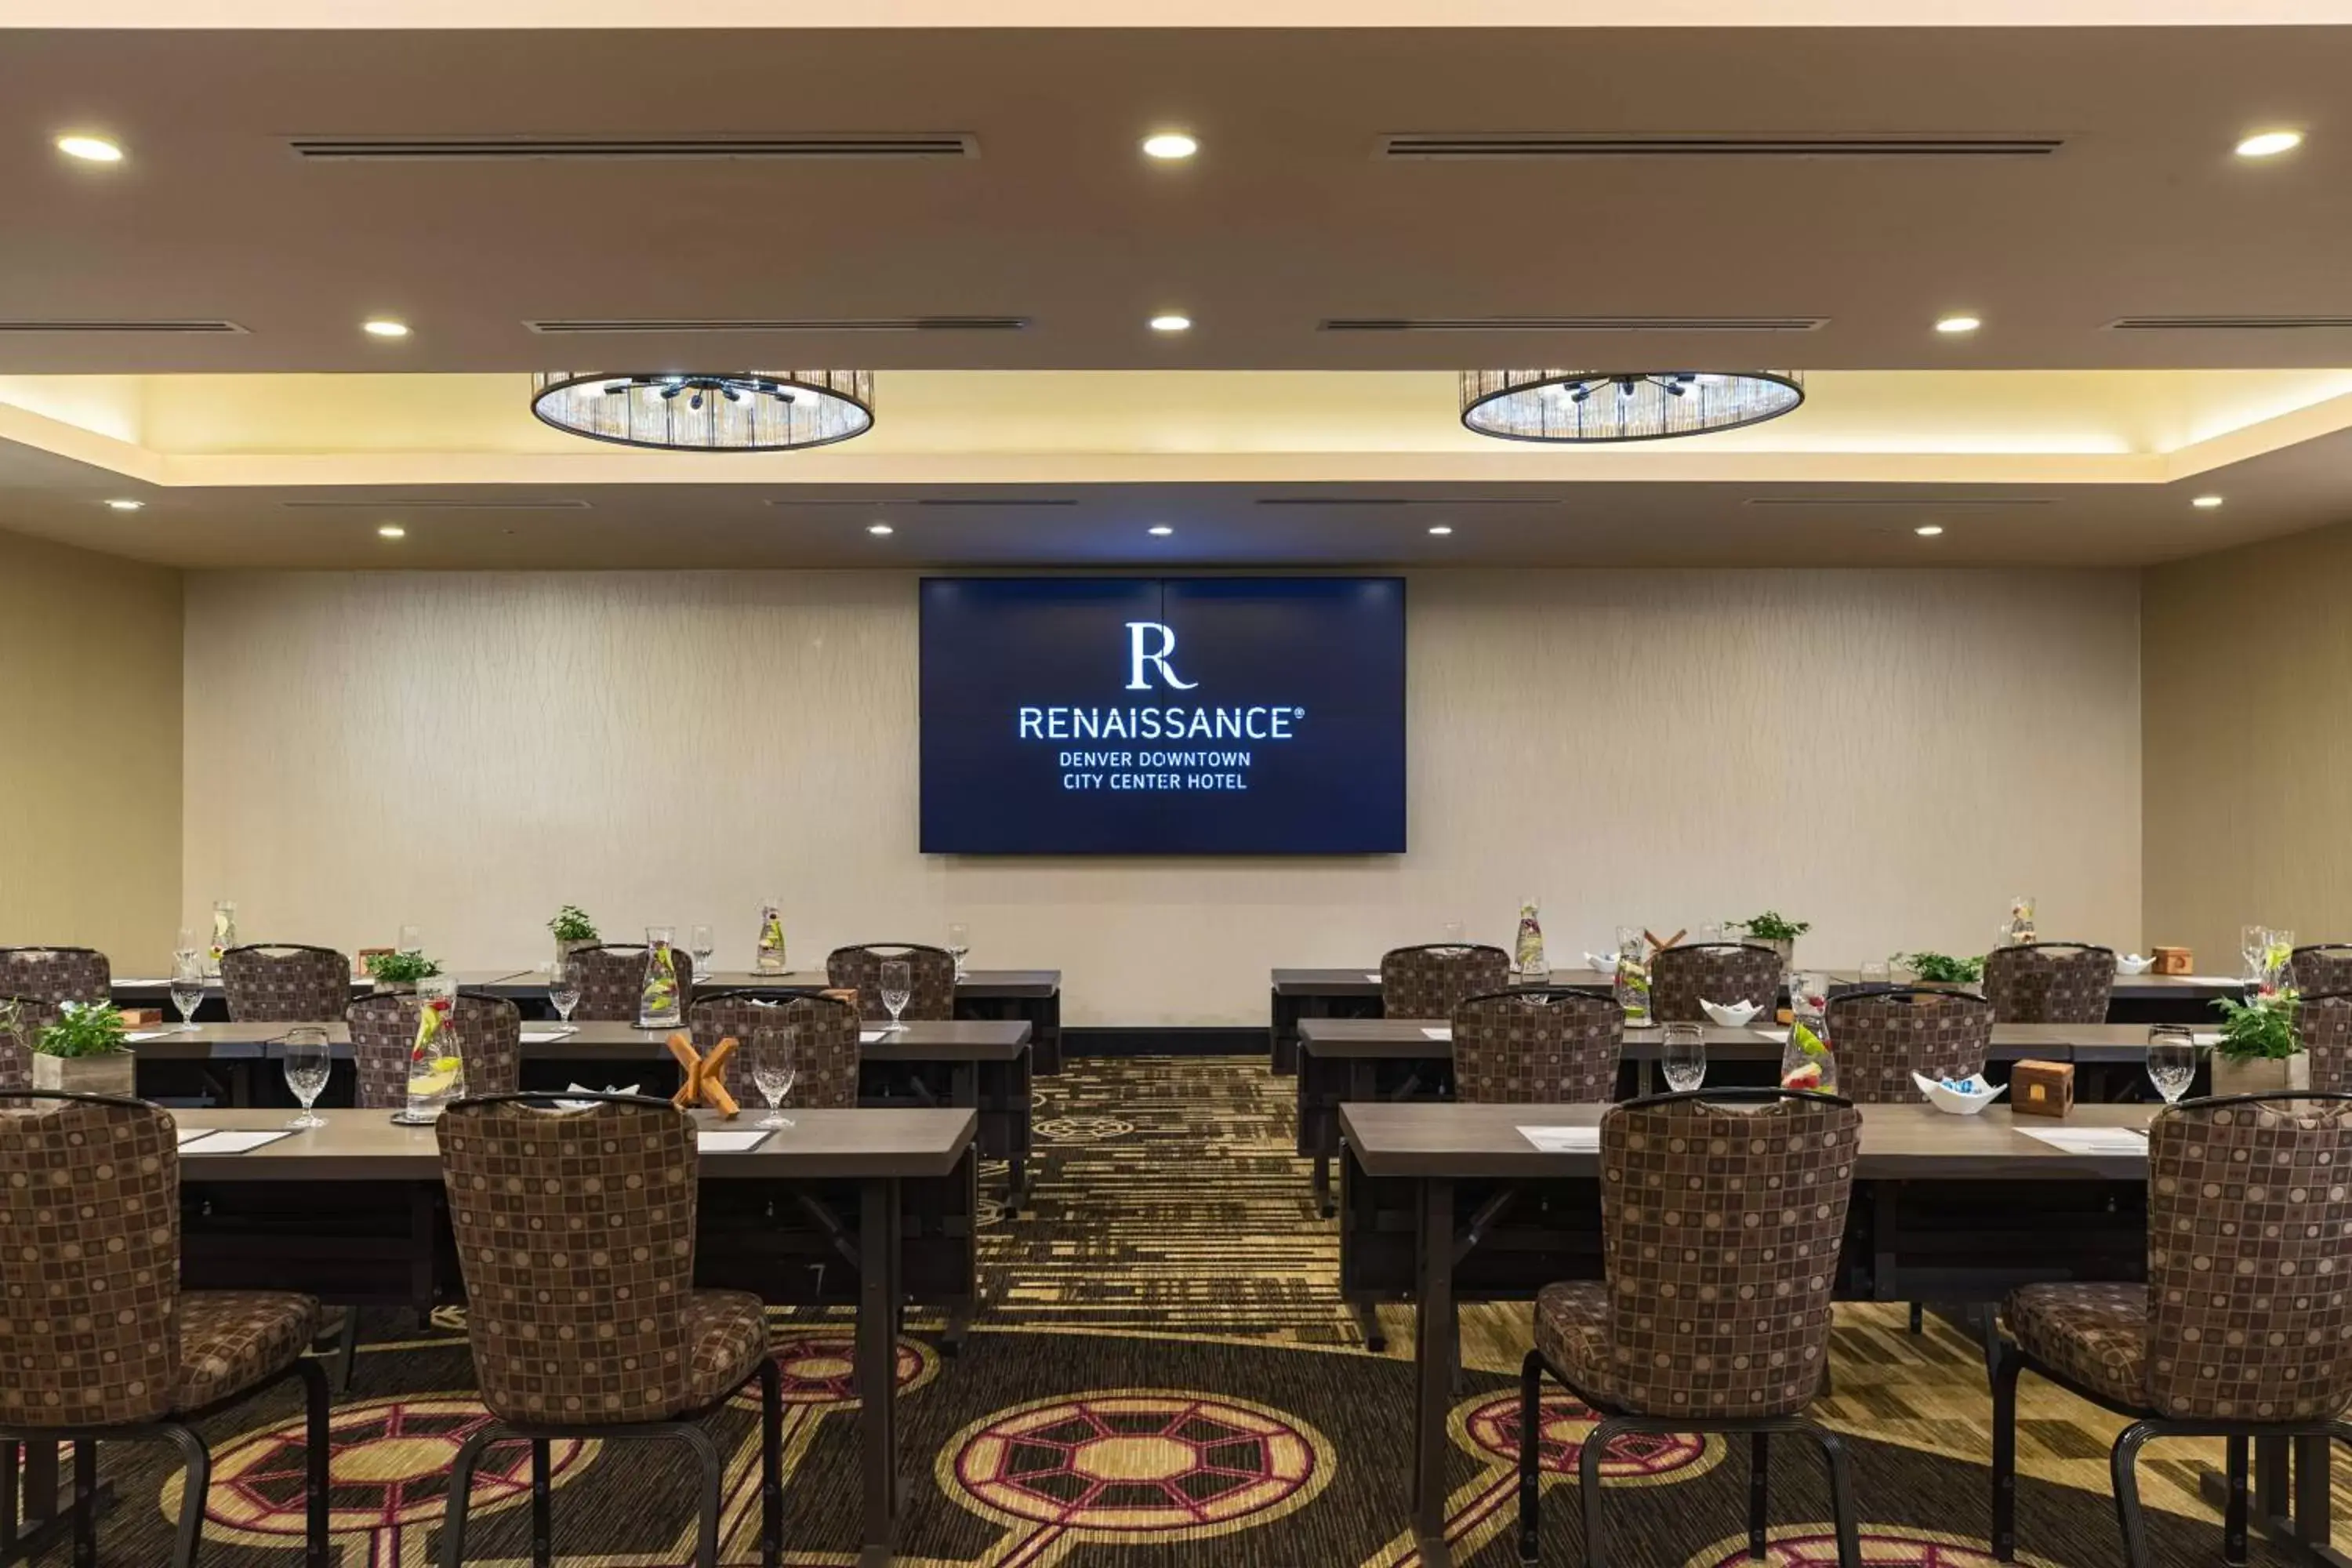 Meeting/conference room in Renaissance Denver Downtown City Center Hotel